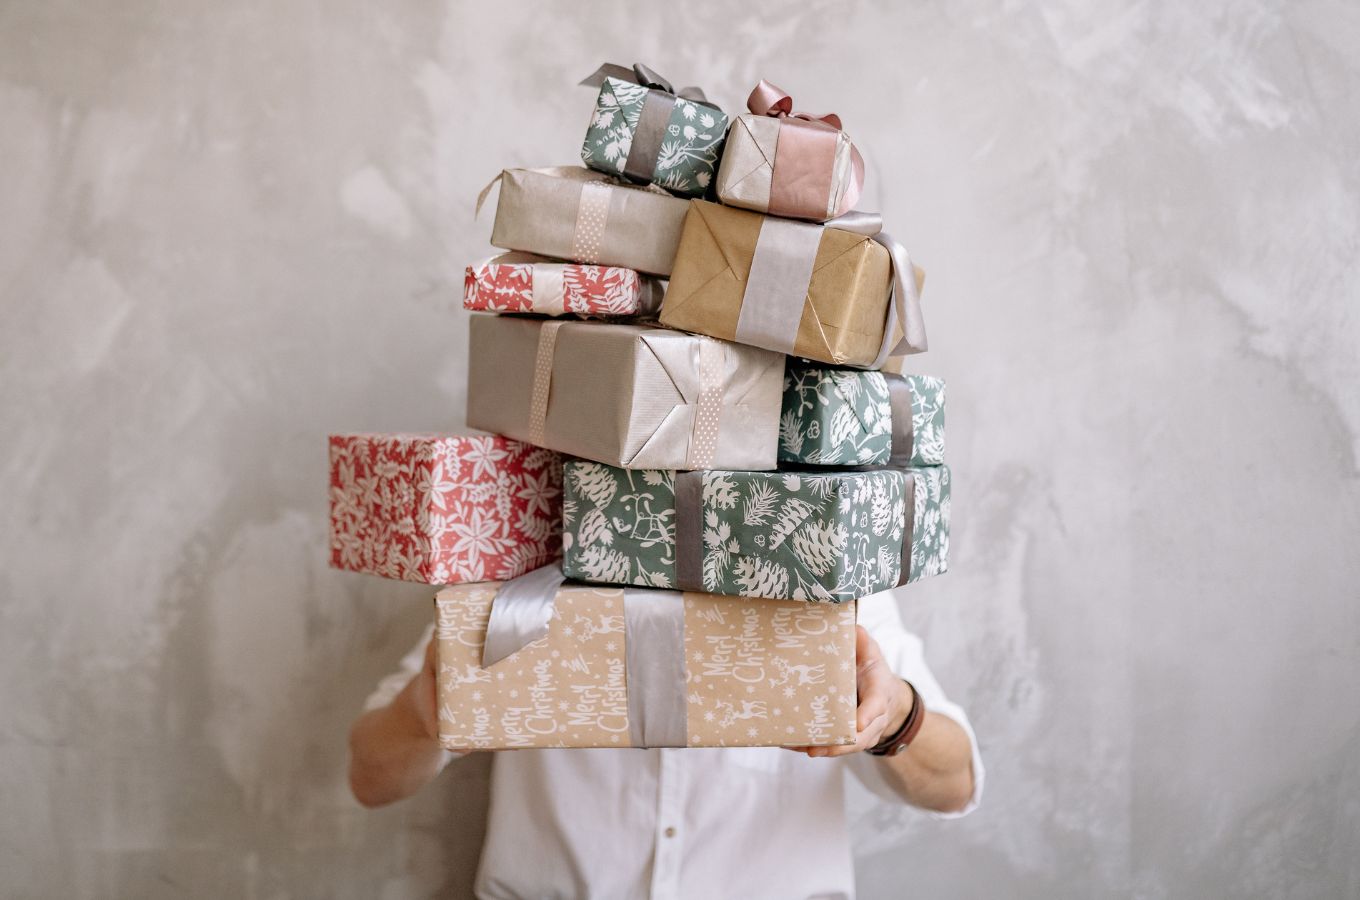 A person carrying a high stack of wrapped gifts